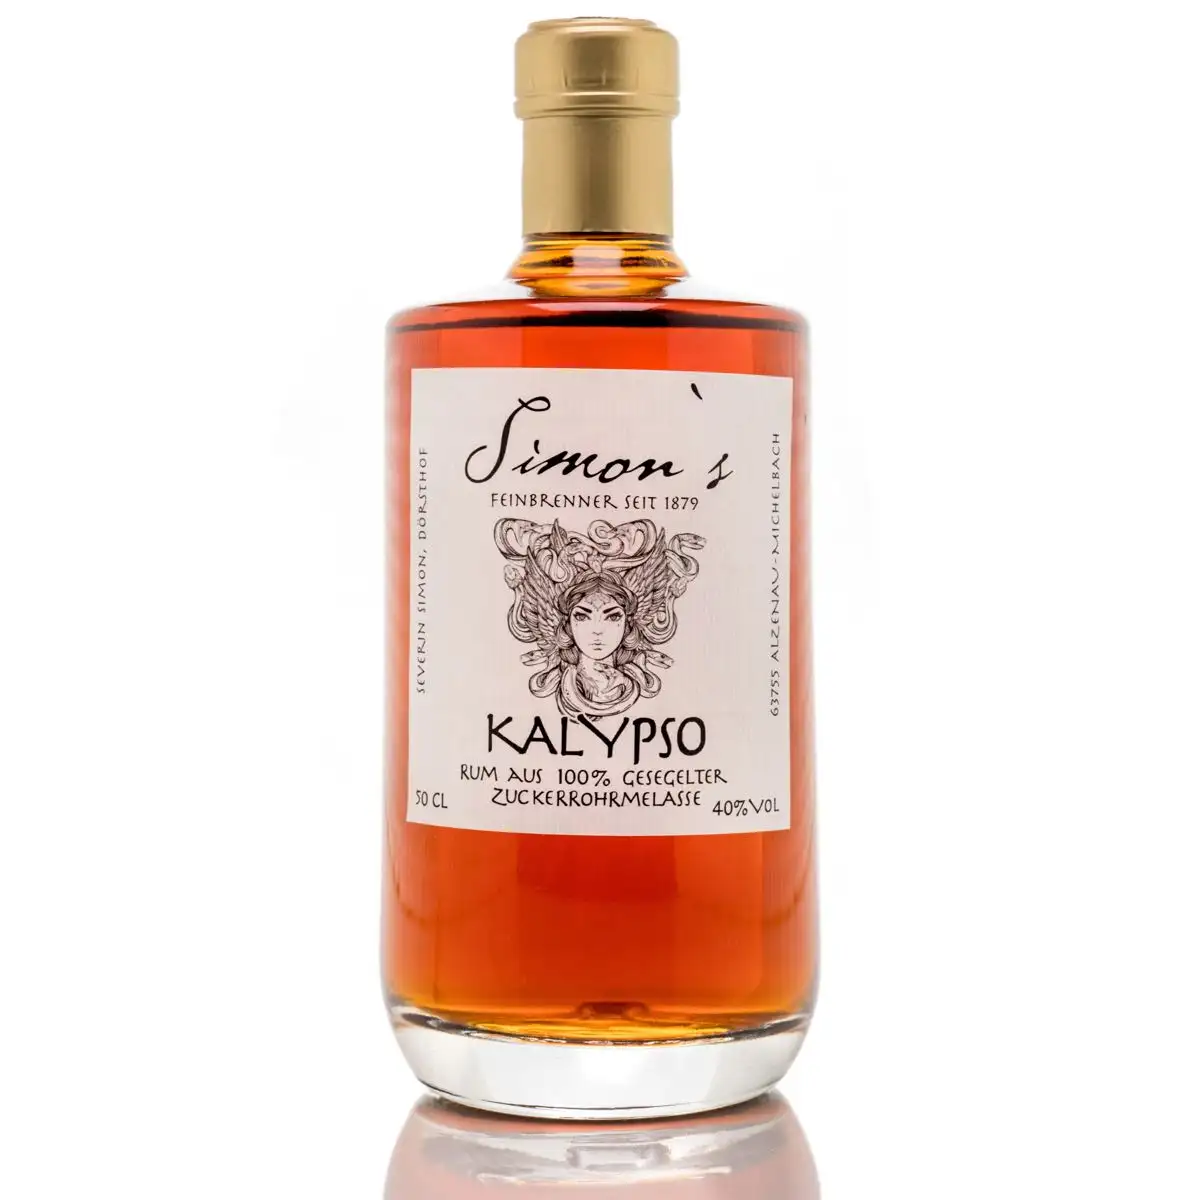 Image of the front of the bottle of the rum Kalypso